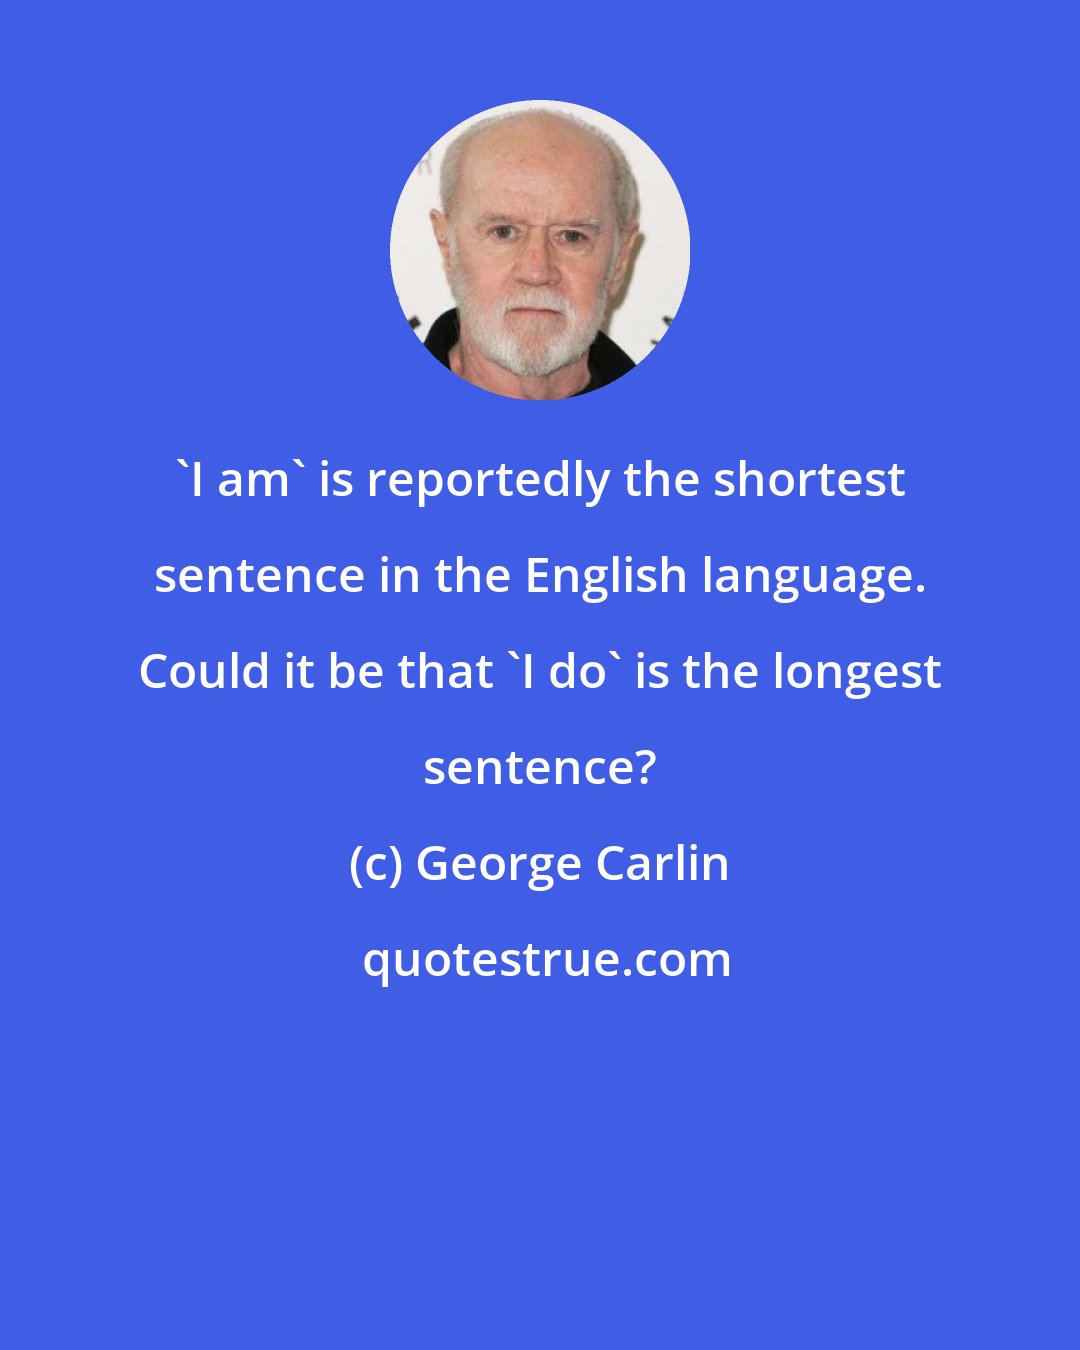 George Carlin: 'I am' is reportedly the shortest sentence in the English language. Could it be that 'I do' is the longest sentence?